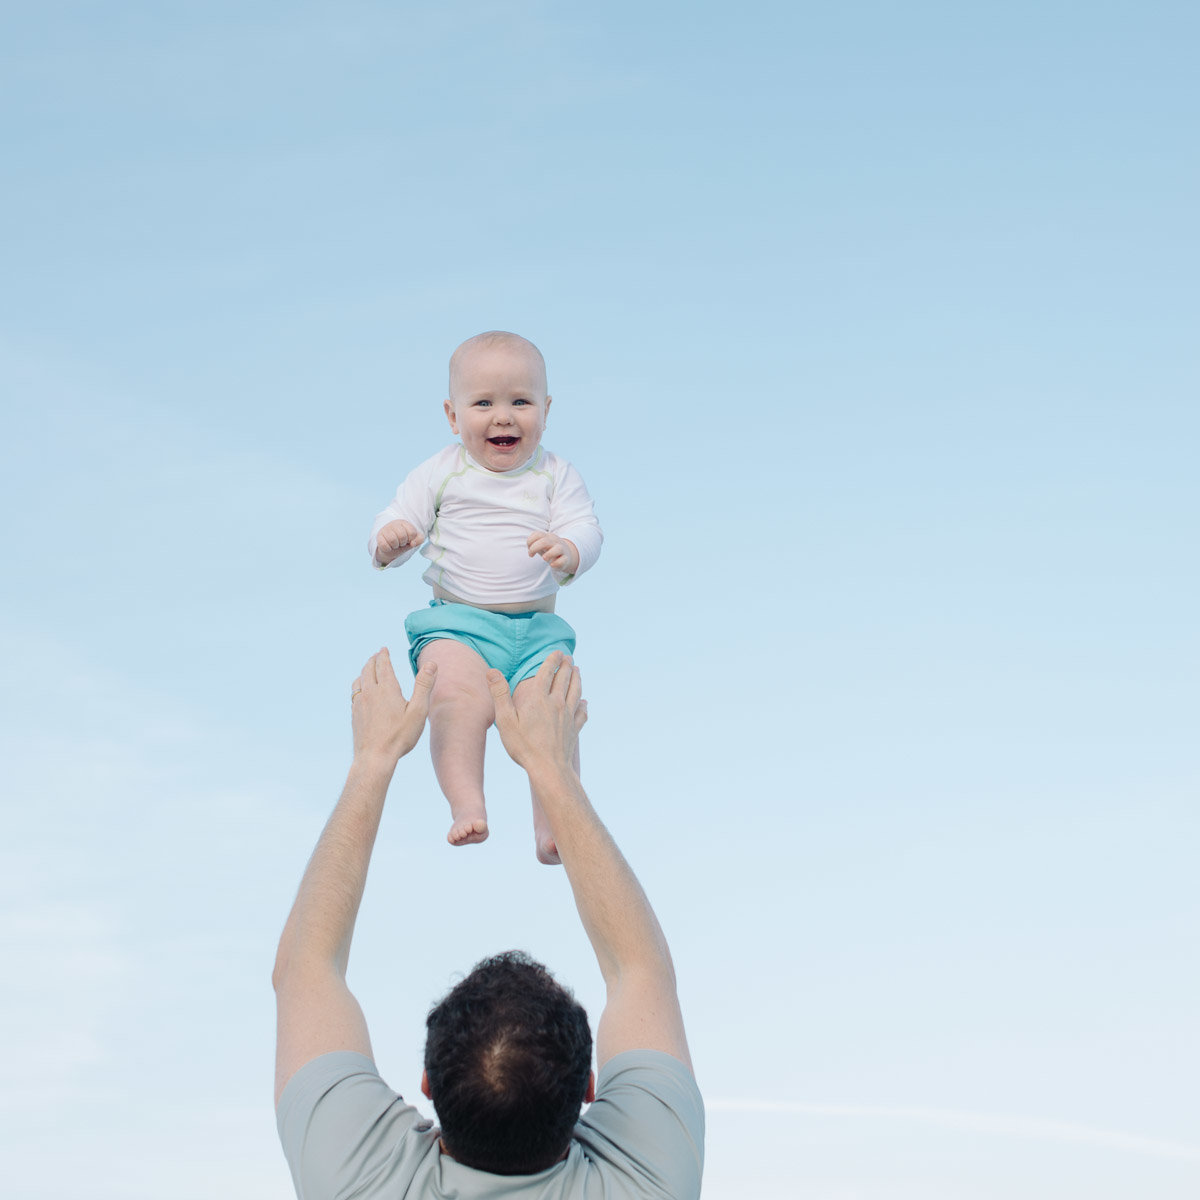 baby being tossed in the air